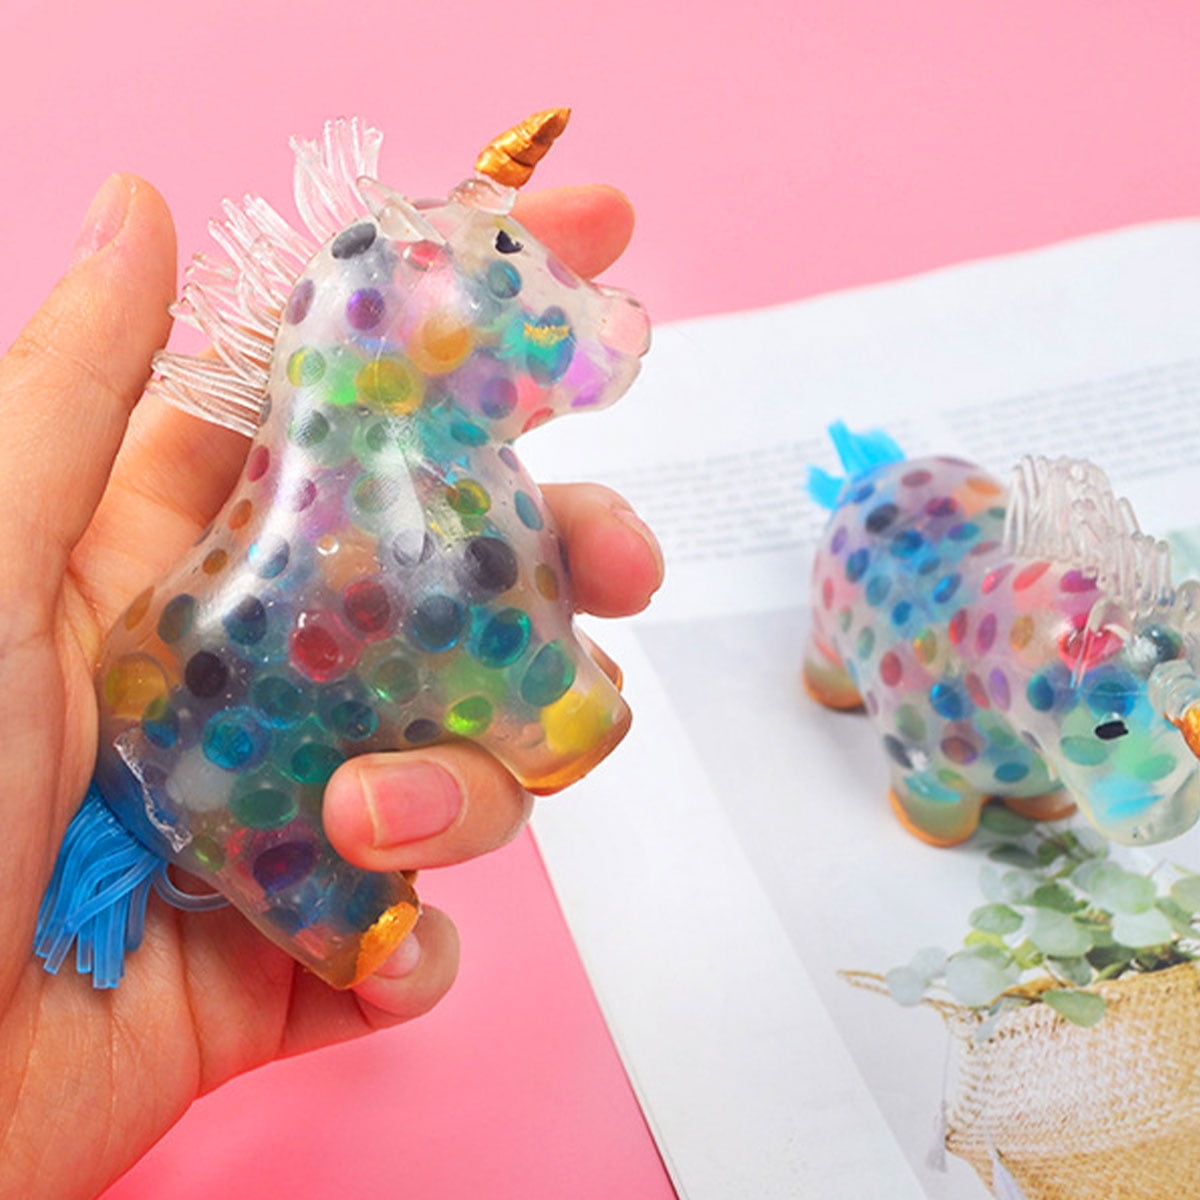 Colorful Gel Water Beads Balls Inside Promote Anxiety and Stress Relief or Adults Boys Promote Calm Focus and Play YAOJITYO 8-Pack Unicorn Squishy Stress Balls Toy for Girls 